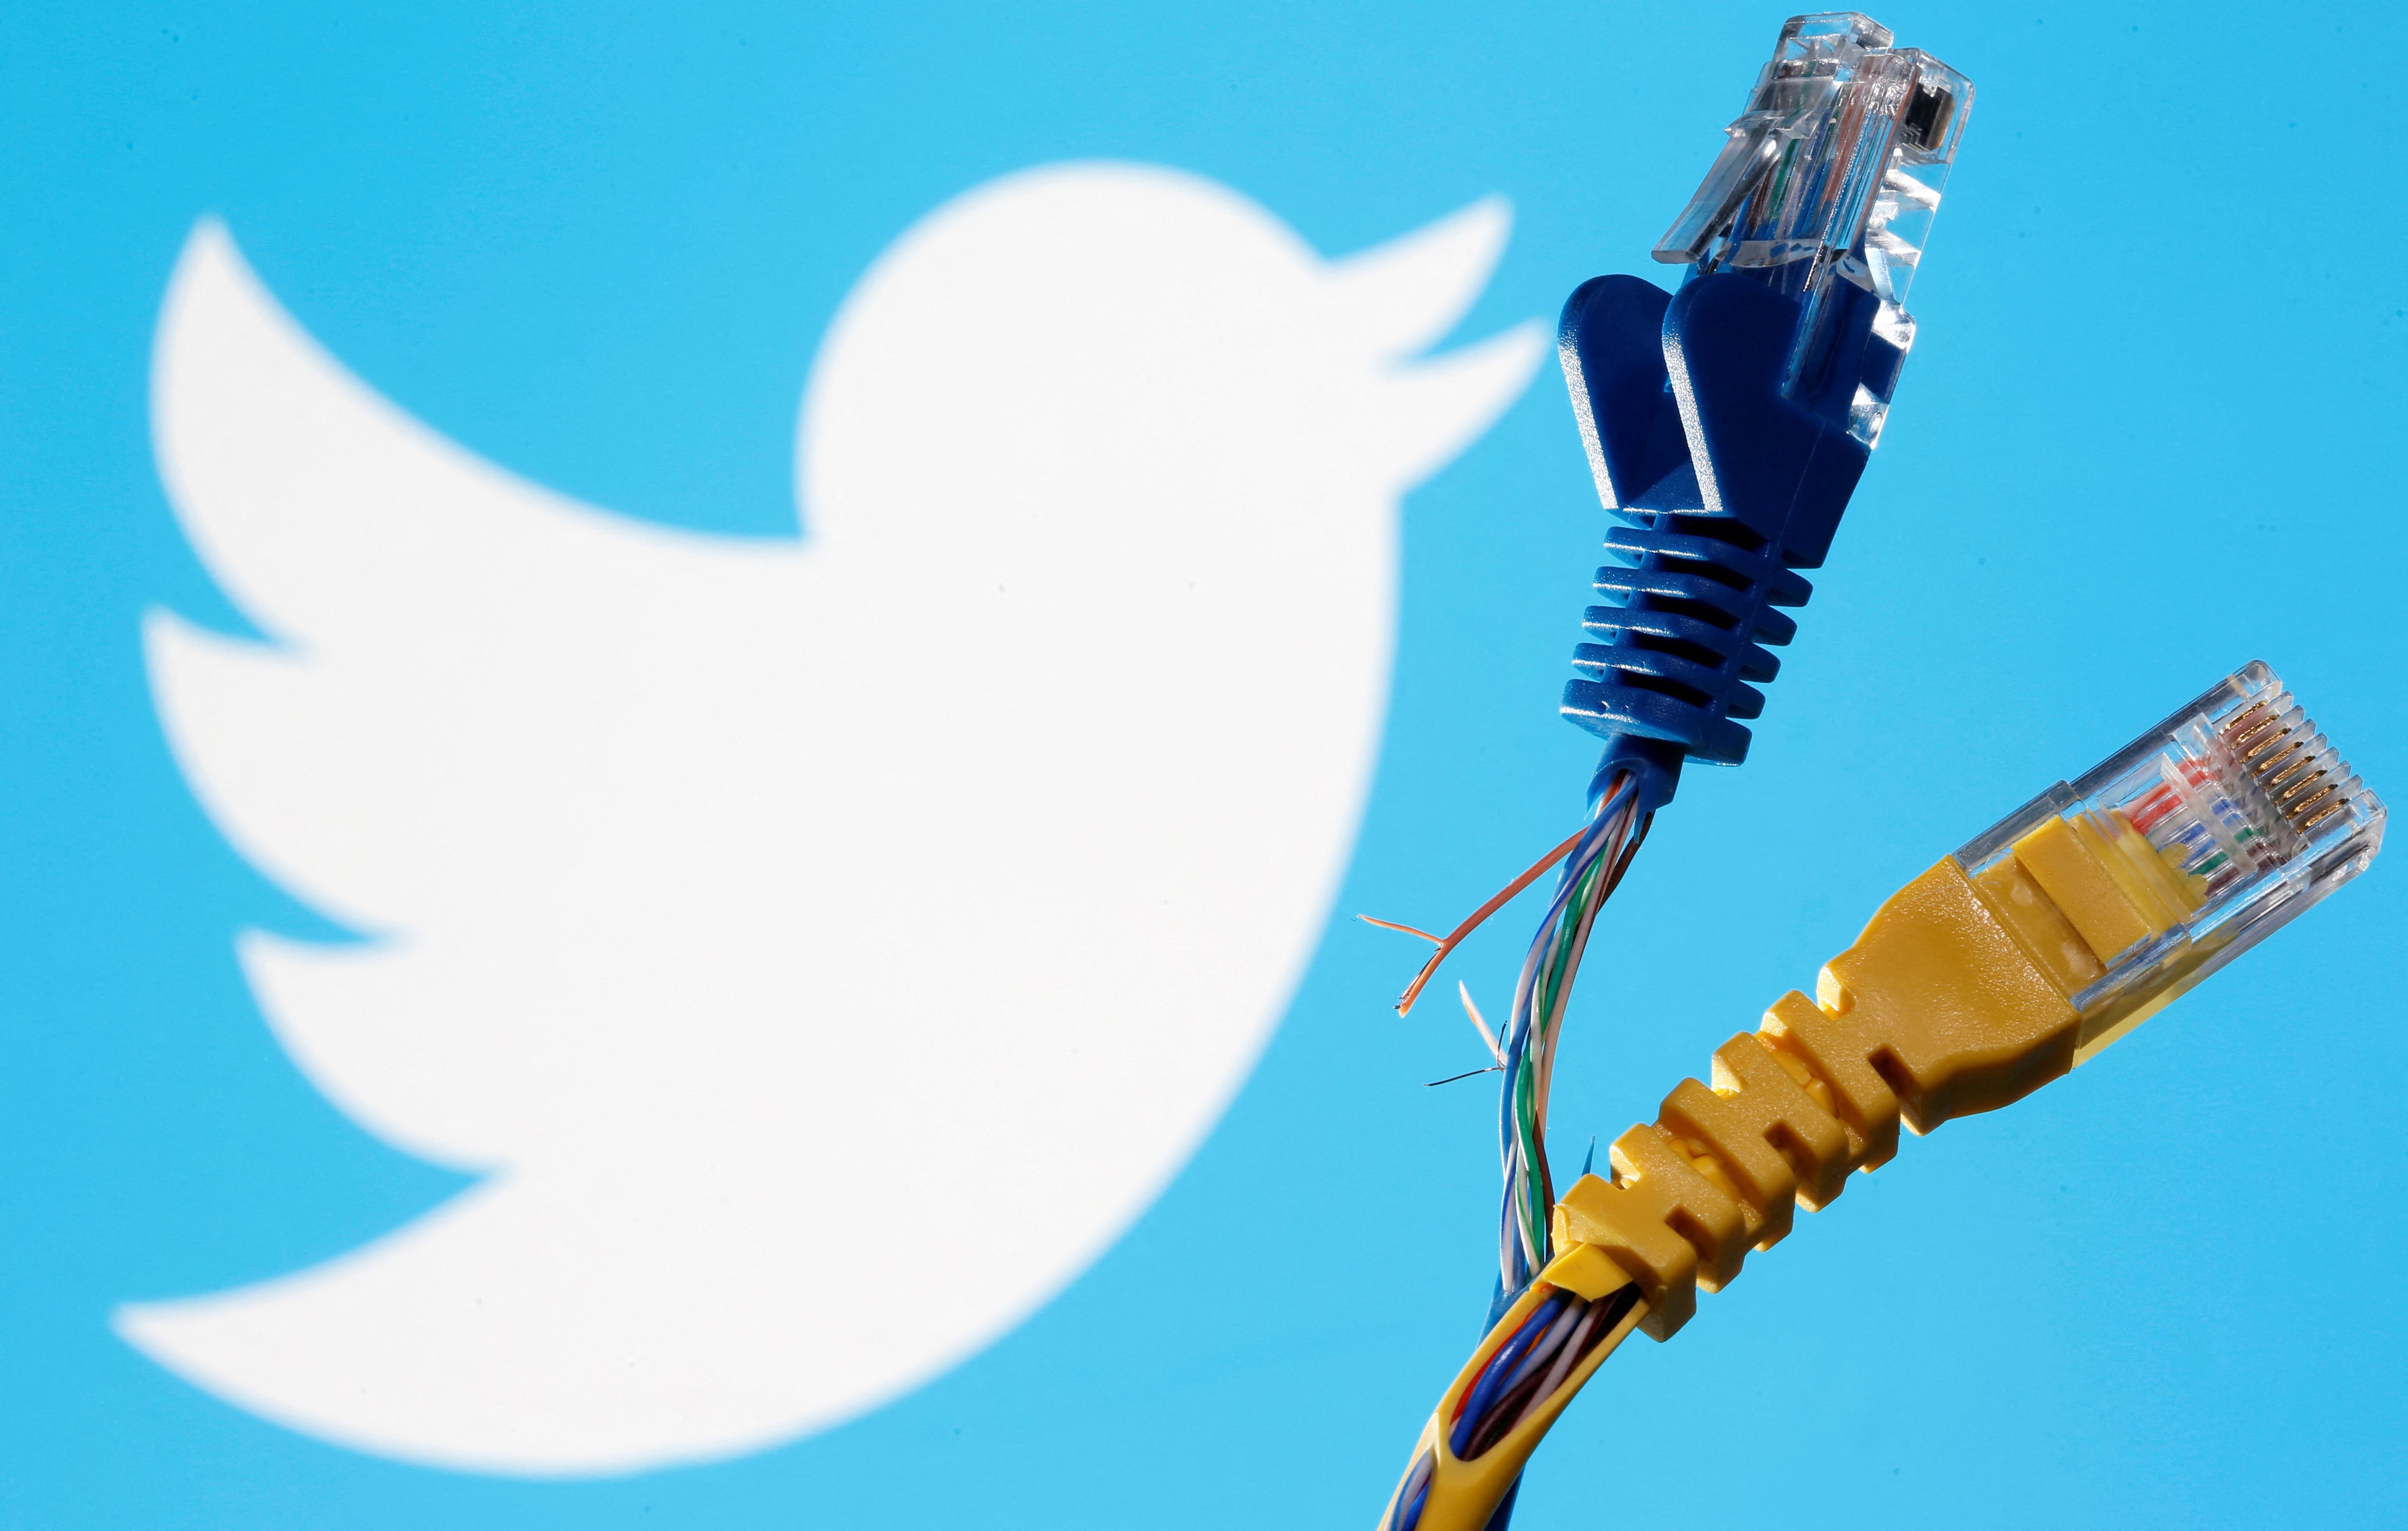 Broken Ethernet cables are seen in front of displayed Twitter logo in this illustration